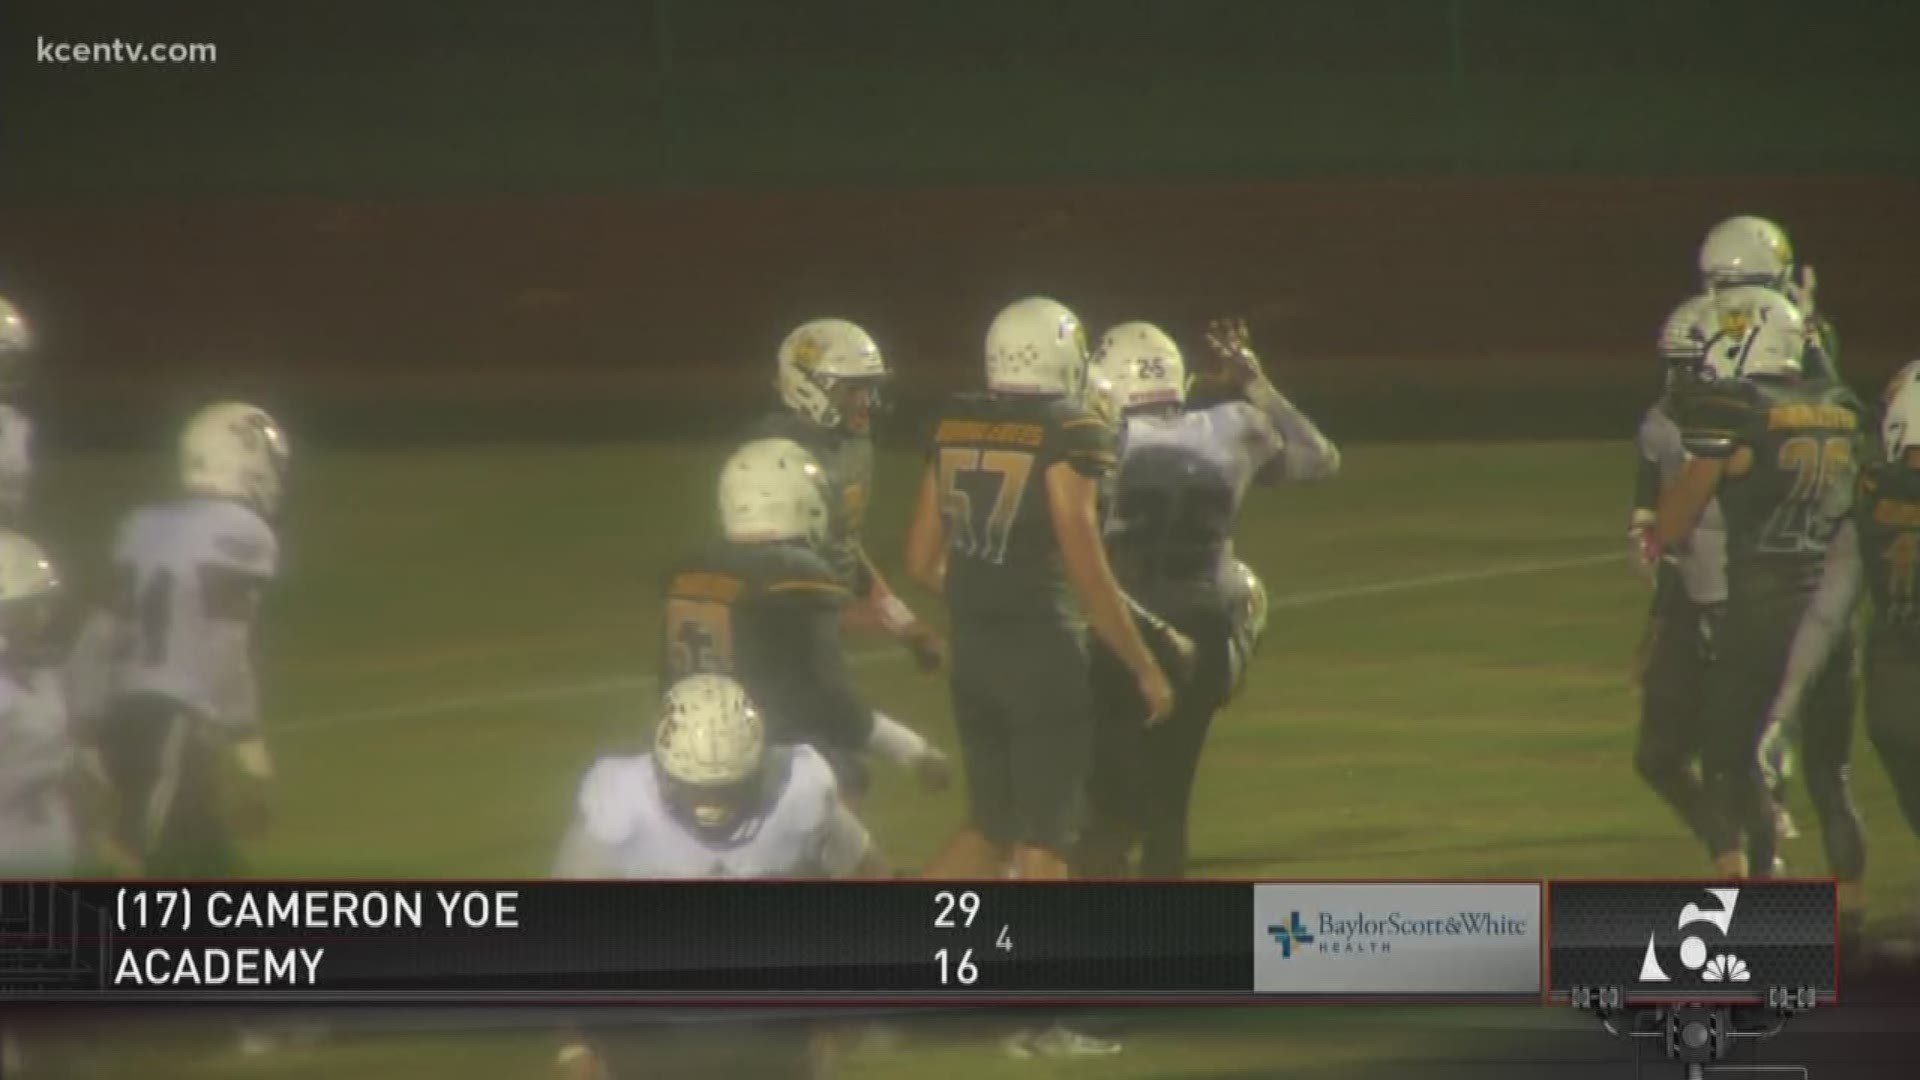 Cameron Yoe led Academy 29-16 in the fourth quarter.